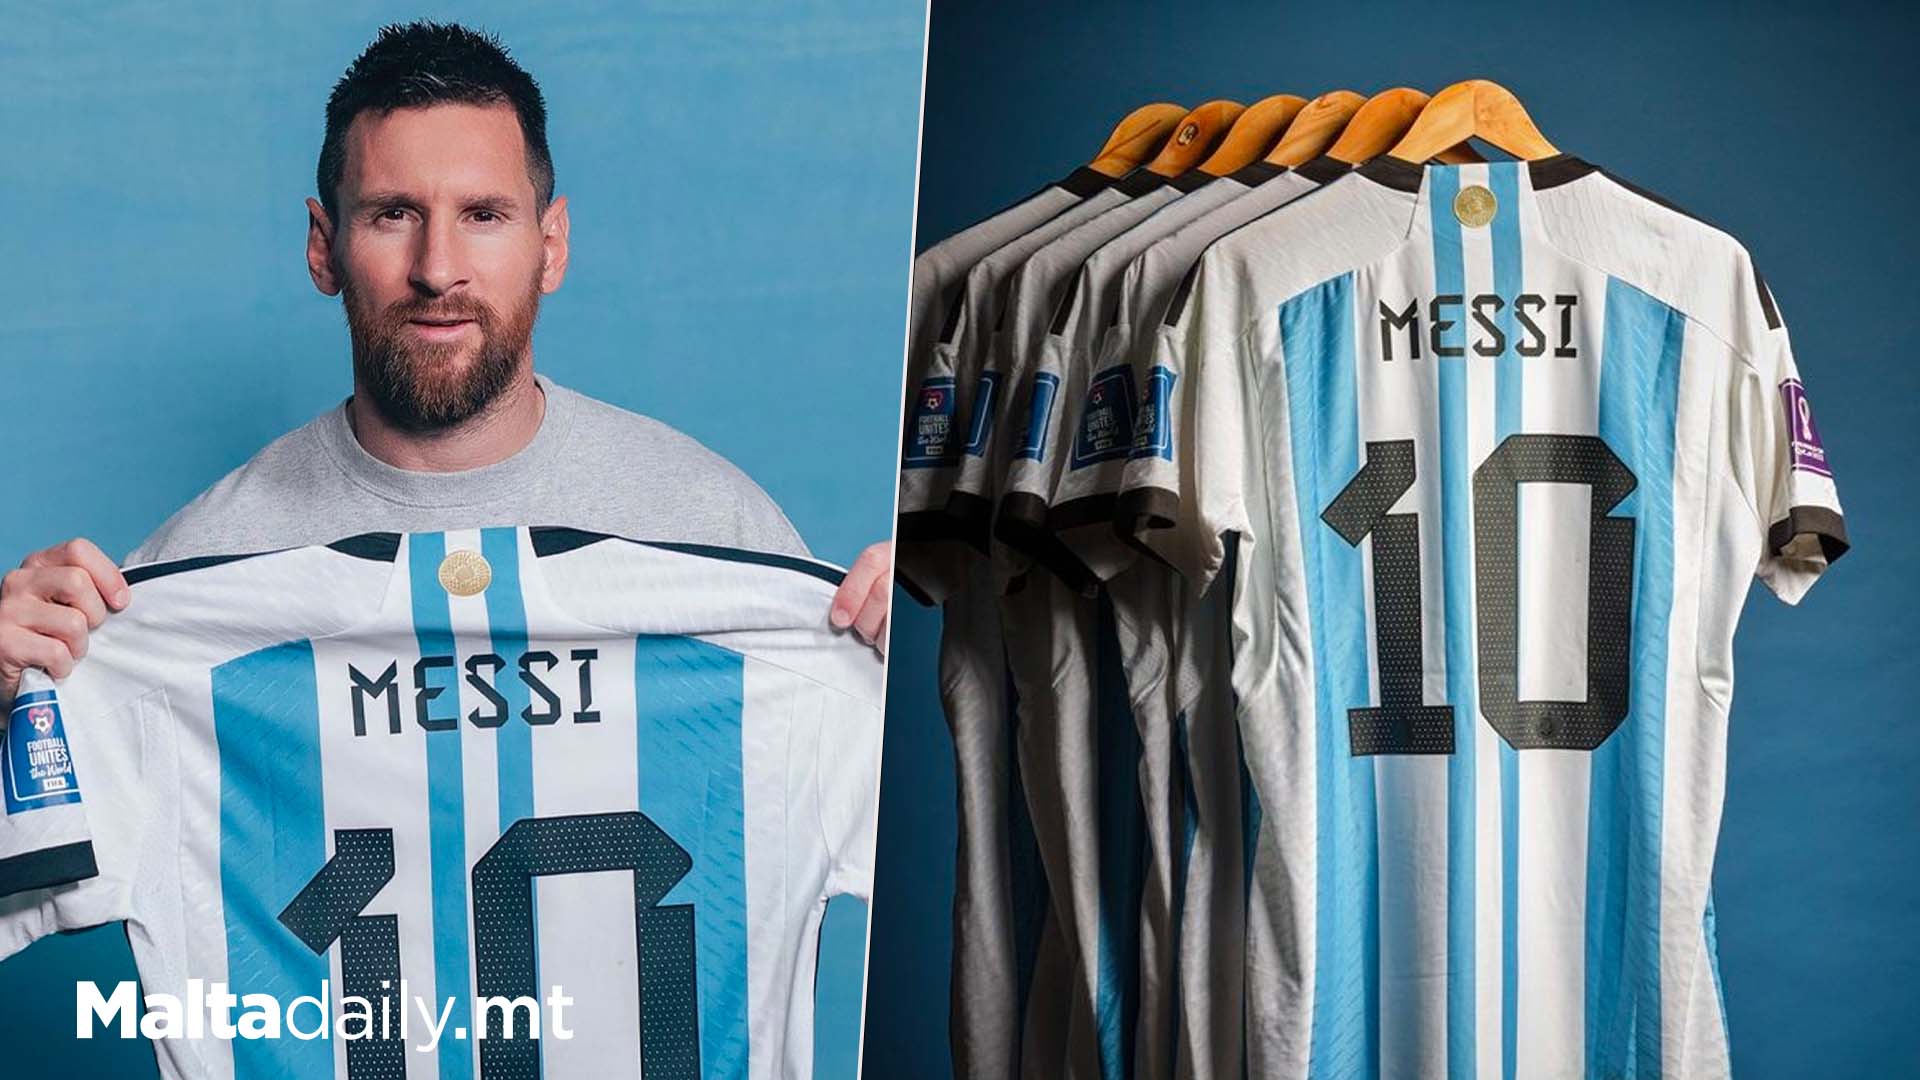 6 Lionel Messi World Cup Jerseys Sold For $7.8 Million